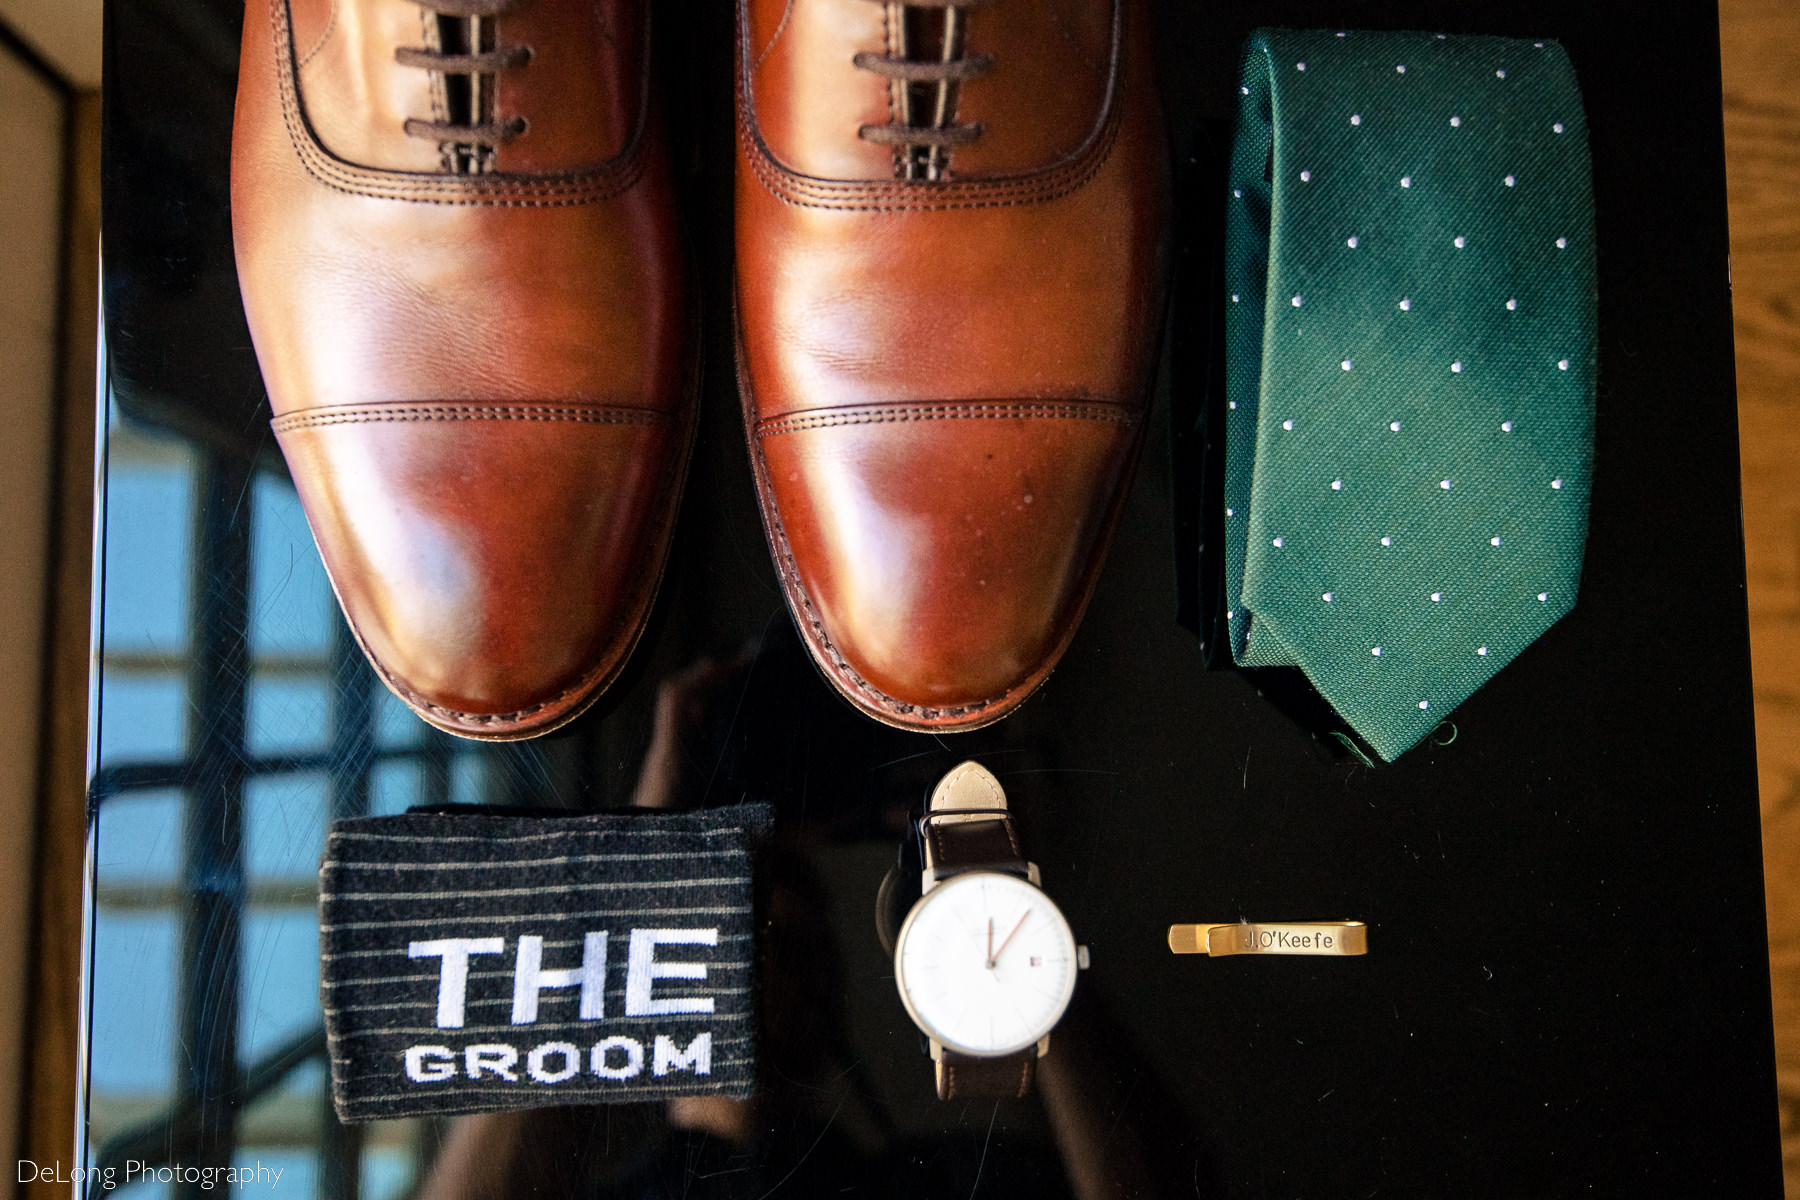 groom's details including brown leather shoes, dark green tie, black and white leather banded watch, engraved tie clip, and "the groom" socks by Charlotte wedding photographers DeLong Photography